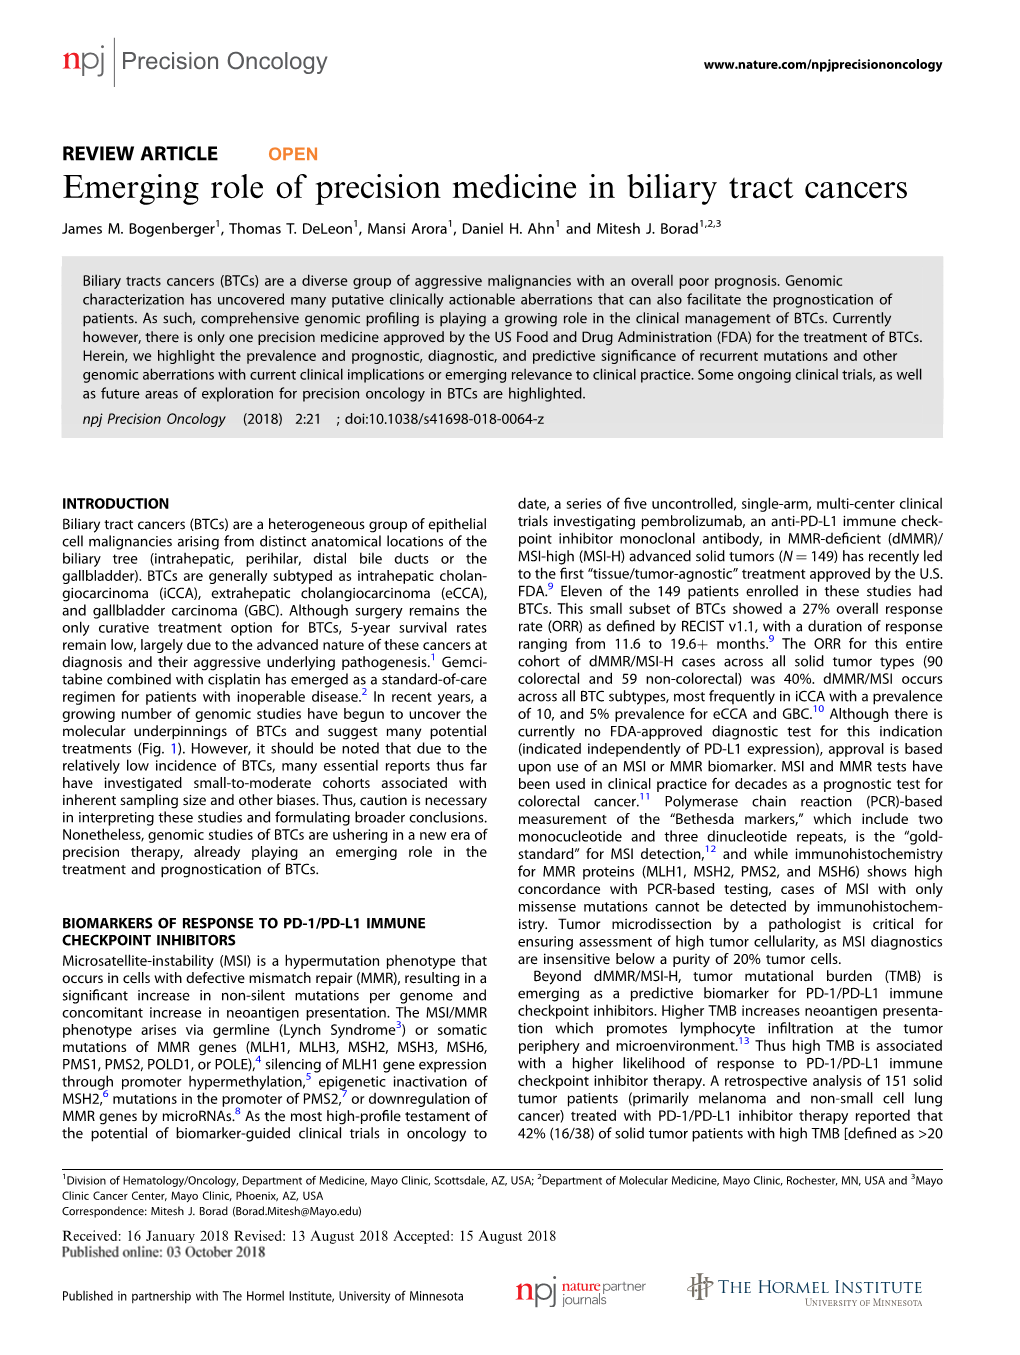 Emerging Role of Precision Medicine in Biliary Tract Cancers